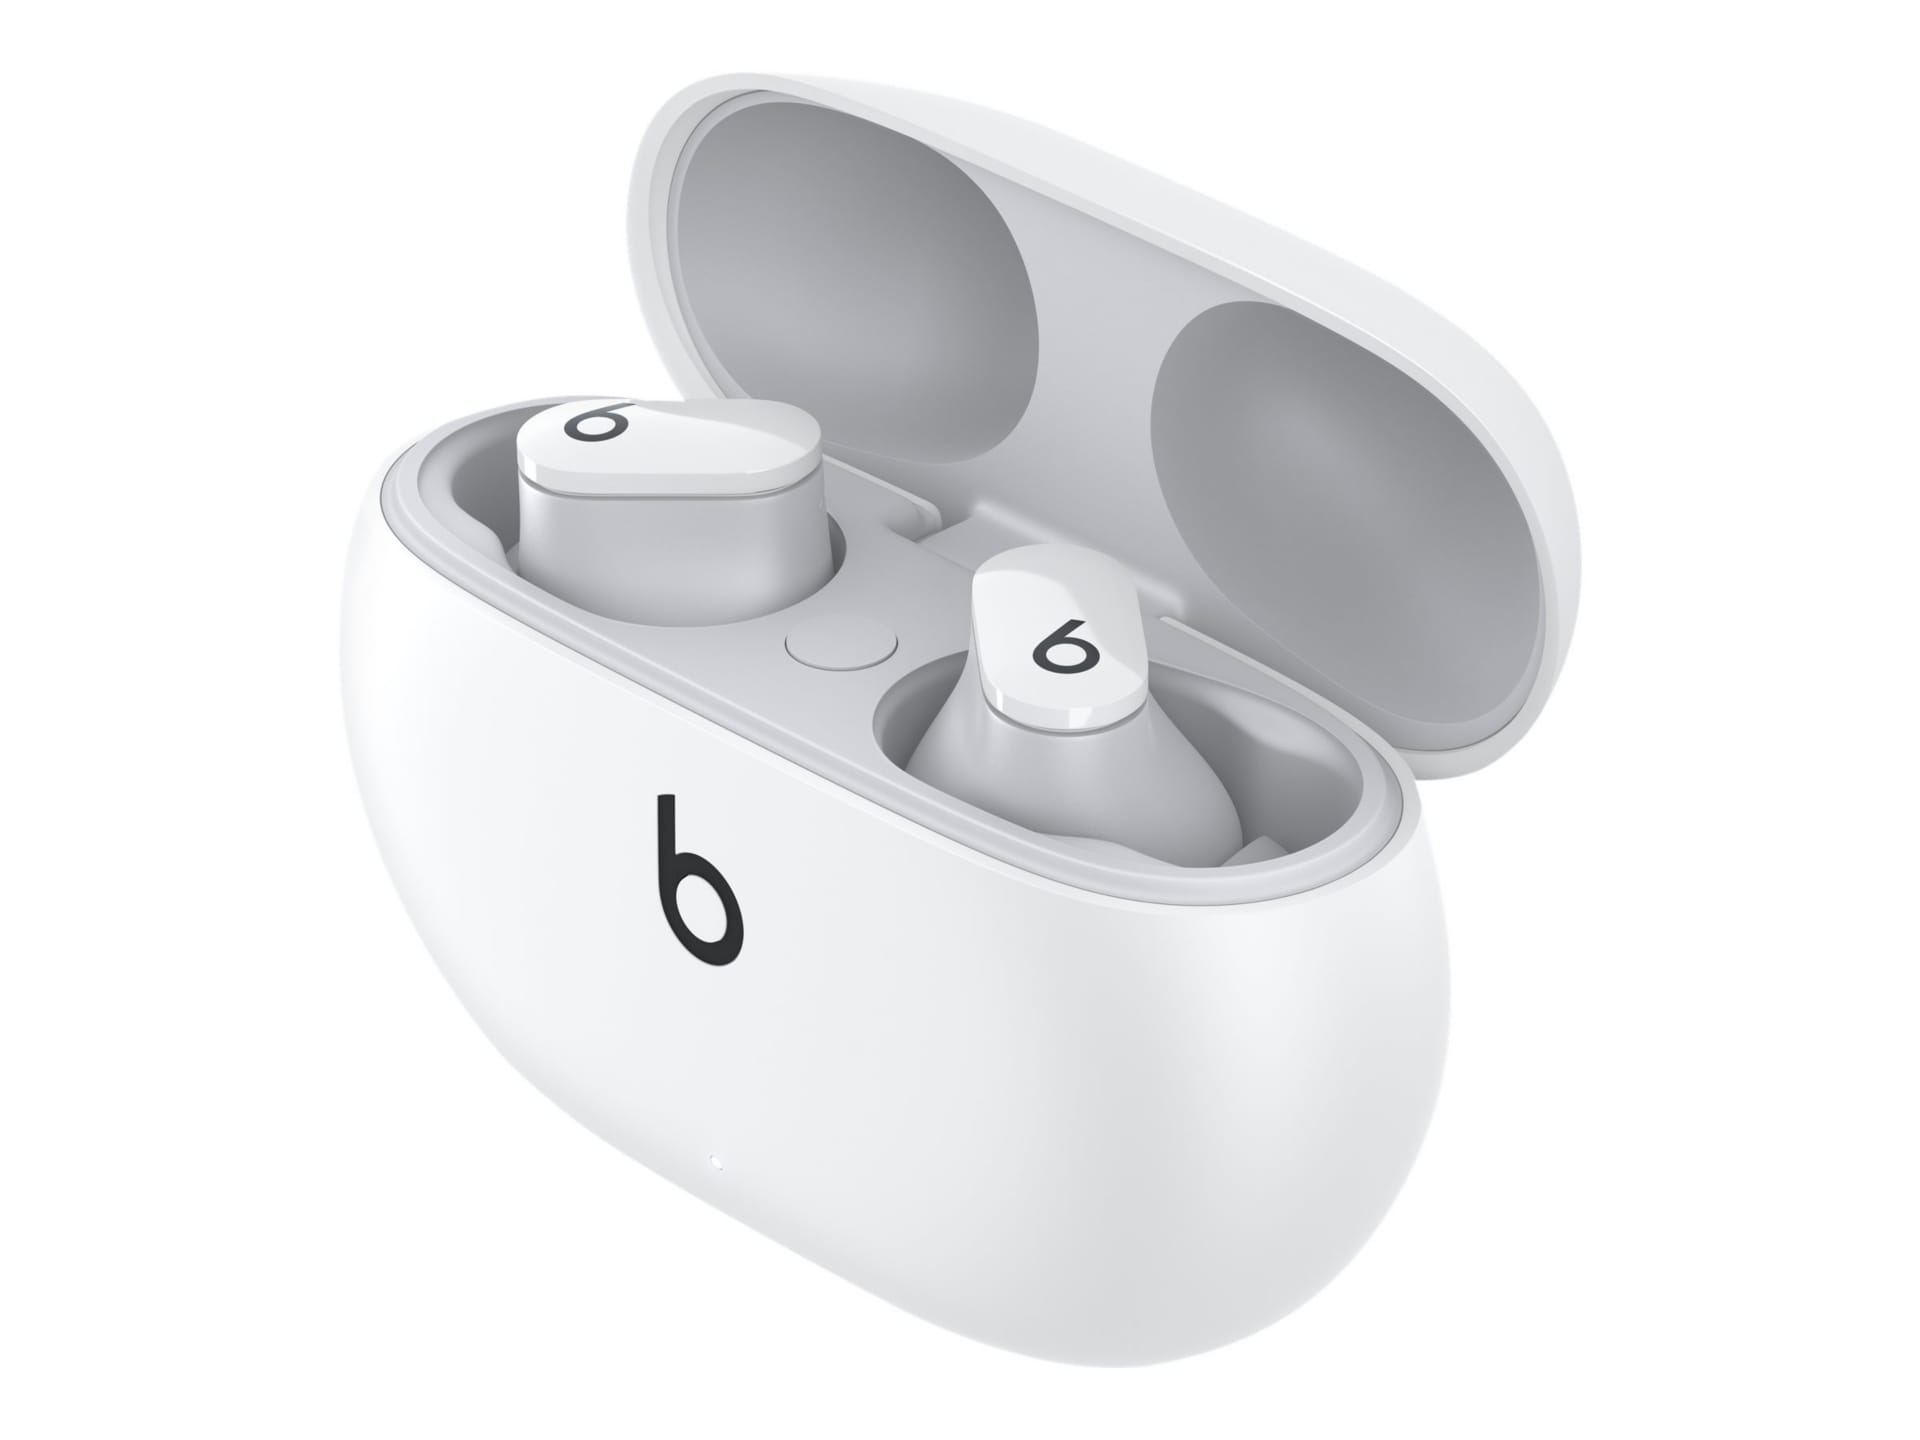 Beats Studio Buds Totally Wireless Earphones Case Replacement Black Red  White